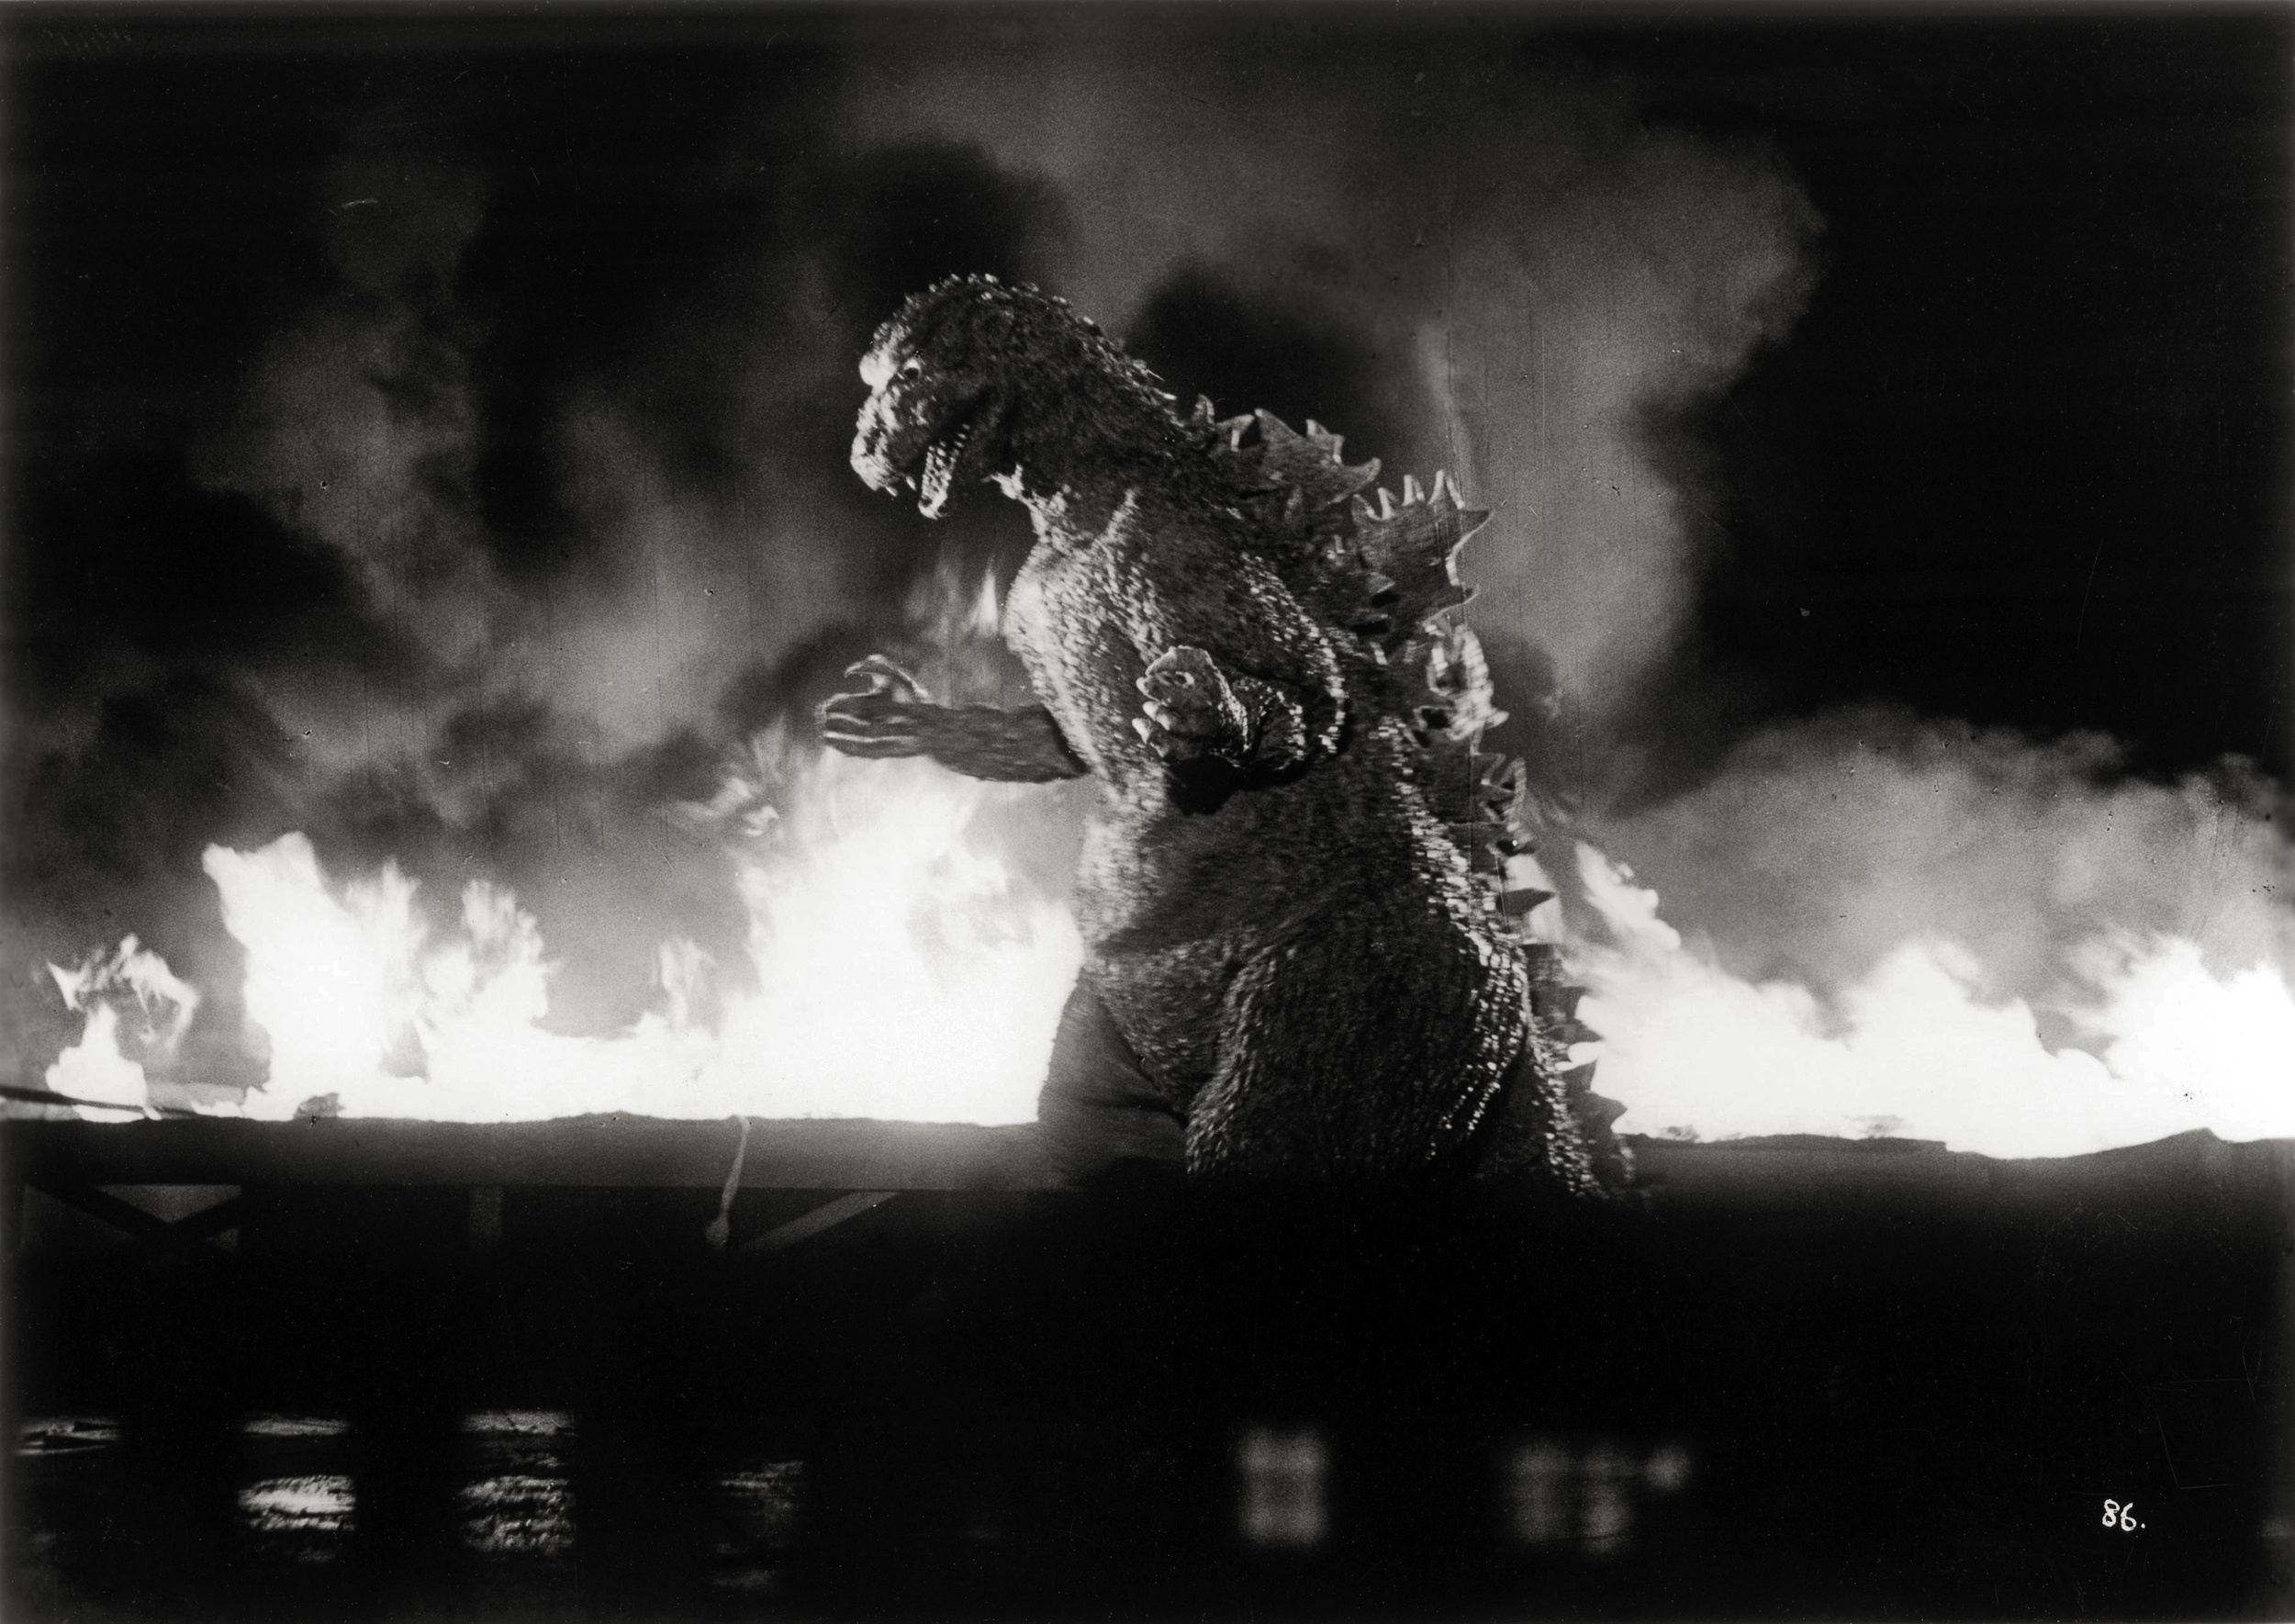 <p>Honestly, you can pick from any of the classic <em>Godzilla</em> movies. The later ones were actually more entertaining, pinning a giant monster against other monsters in a massive battle. But the original remains a staple of monster cinema, despite being a metaphor for nuclear destruction.  </p><p><a href='https://www.msn.com/en-us/community/channel/vid-cj9pqbr0vn9in2b6ddcd8sfgpfq6x6utp44fssrv6mc2gtybw0us'>Follow us on MSN to see more of our exclusive entertainment content.</a></p>